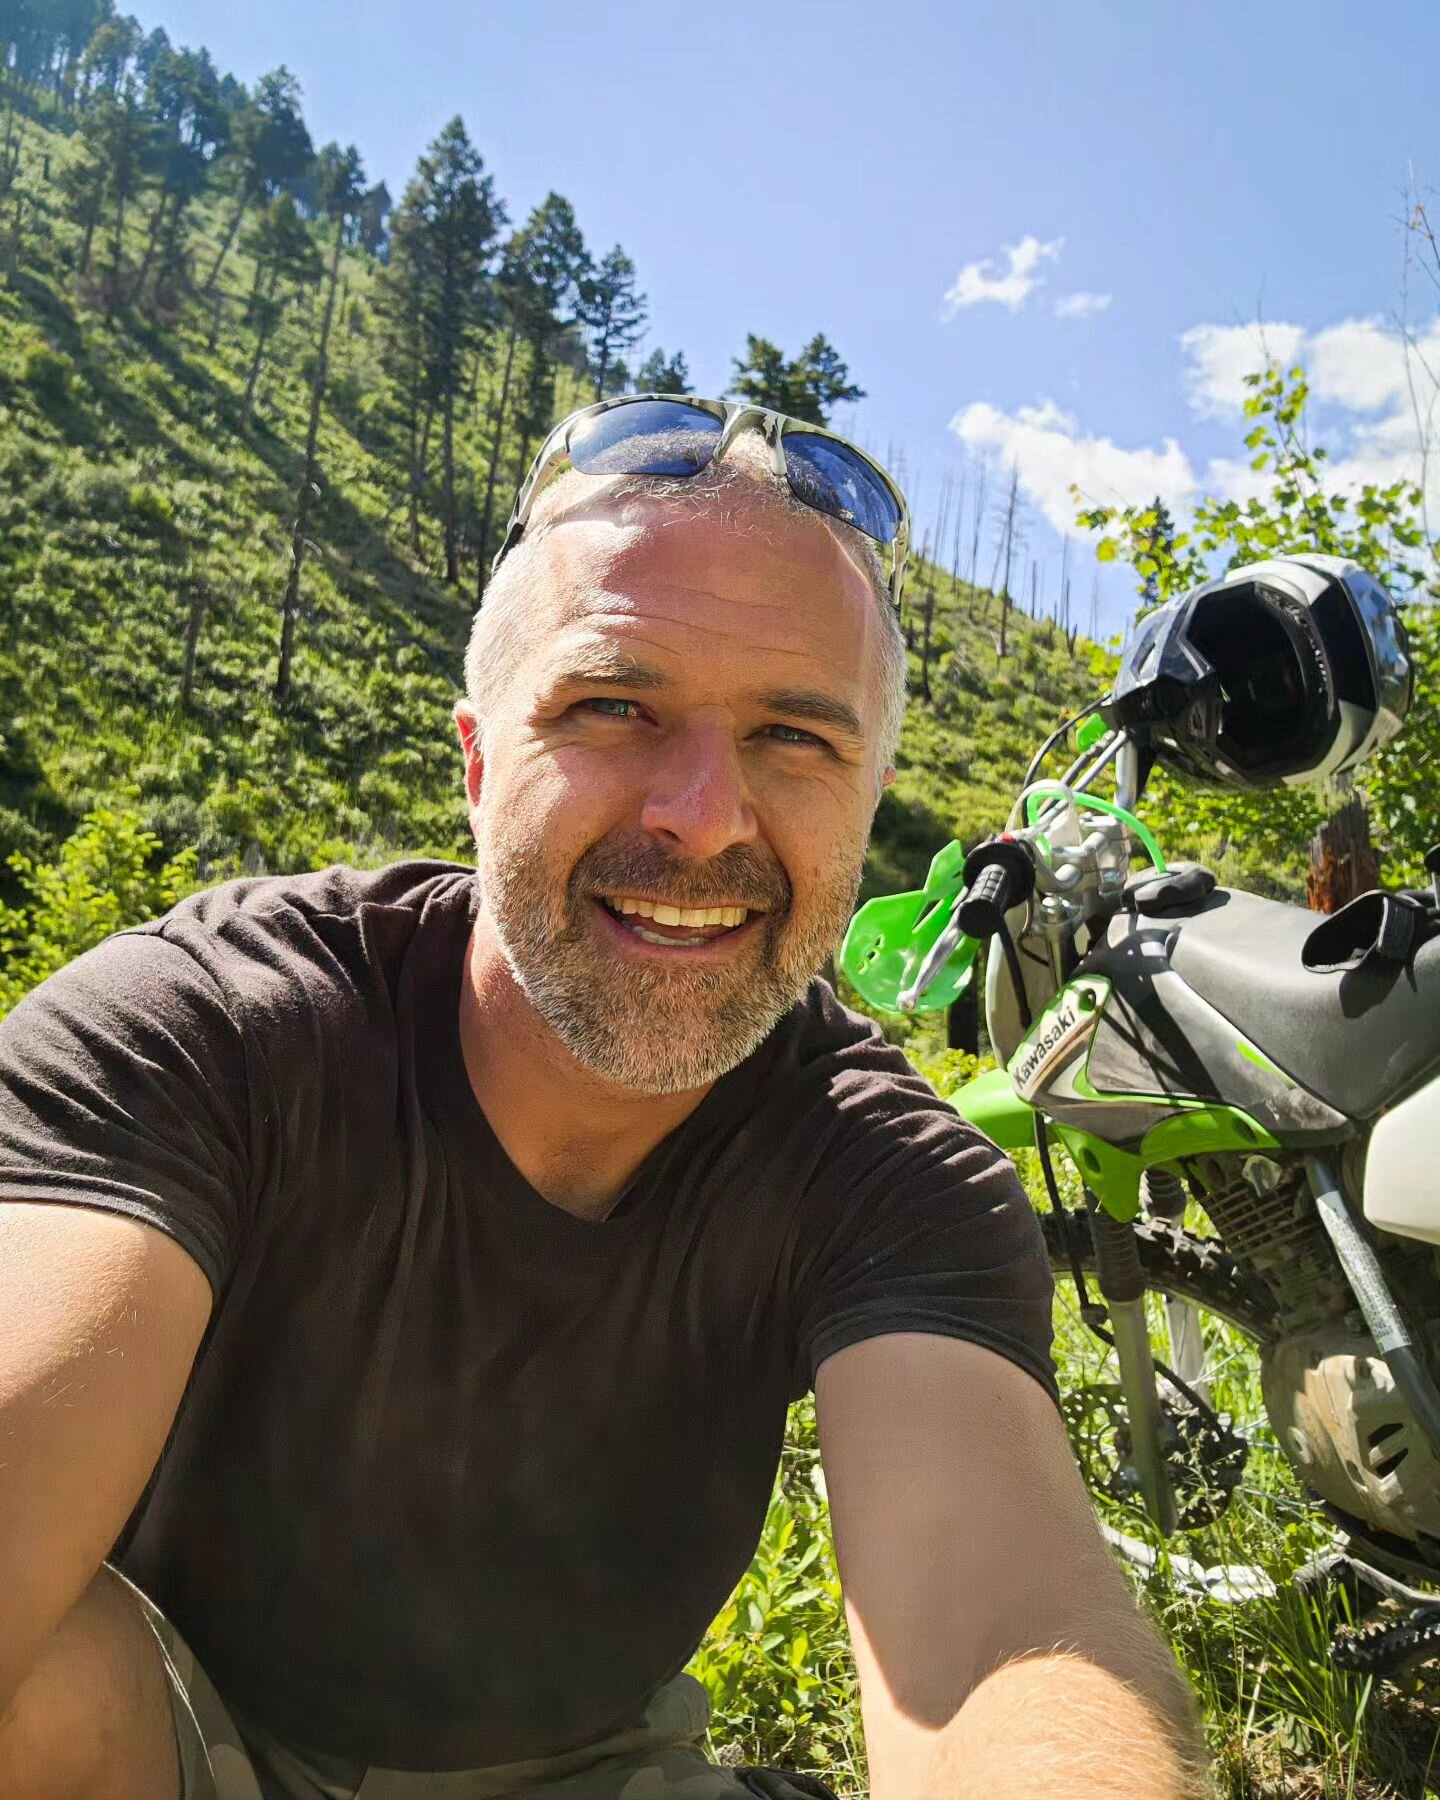 Trail riding some hills in Montana!  What fun things are you all doing this weekend?